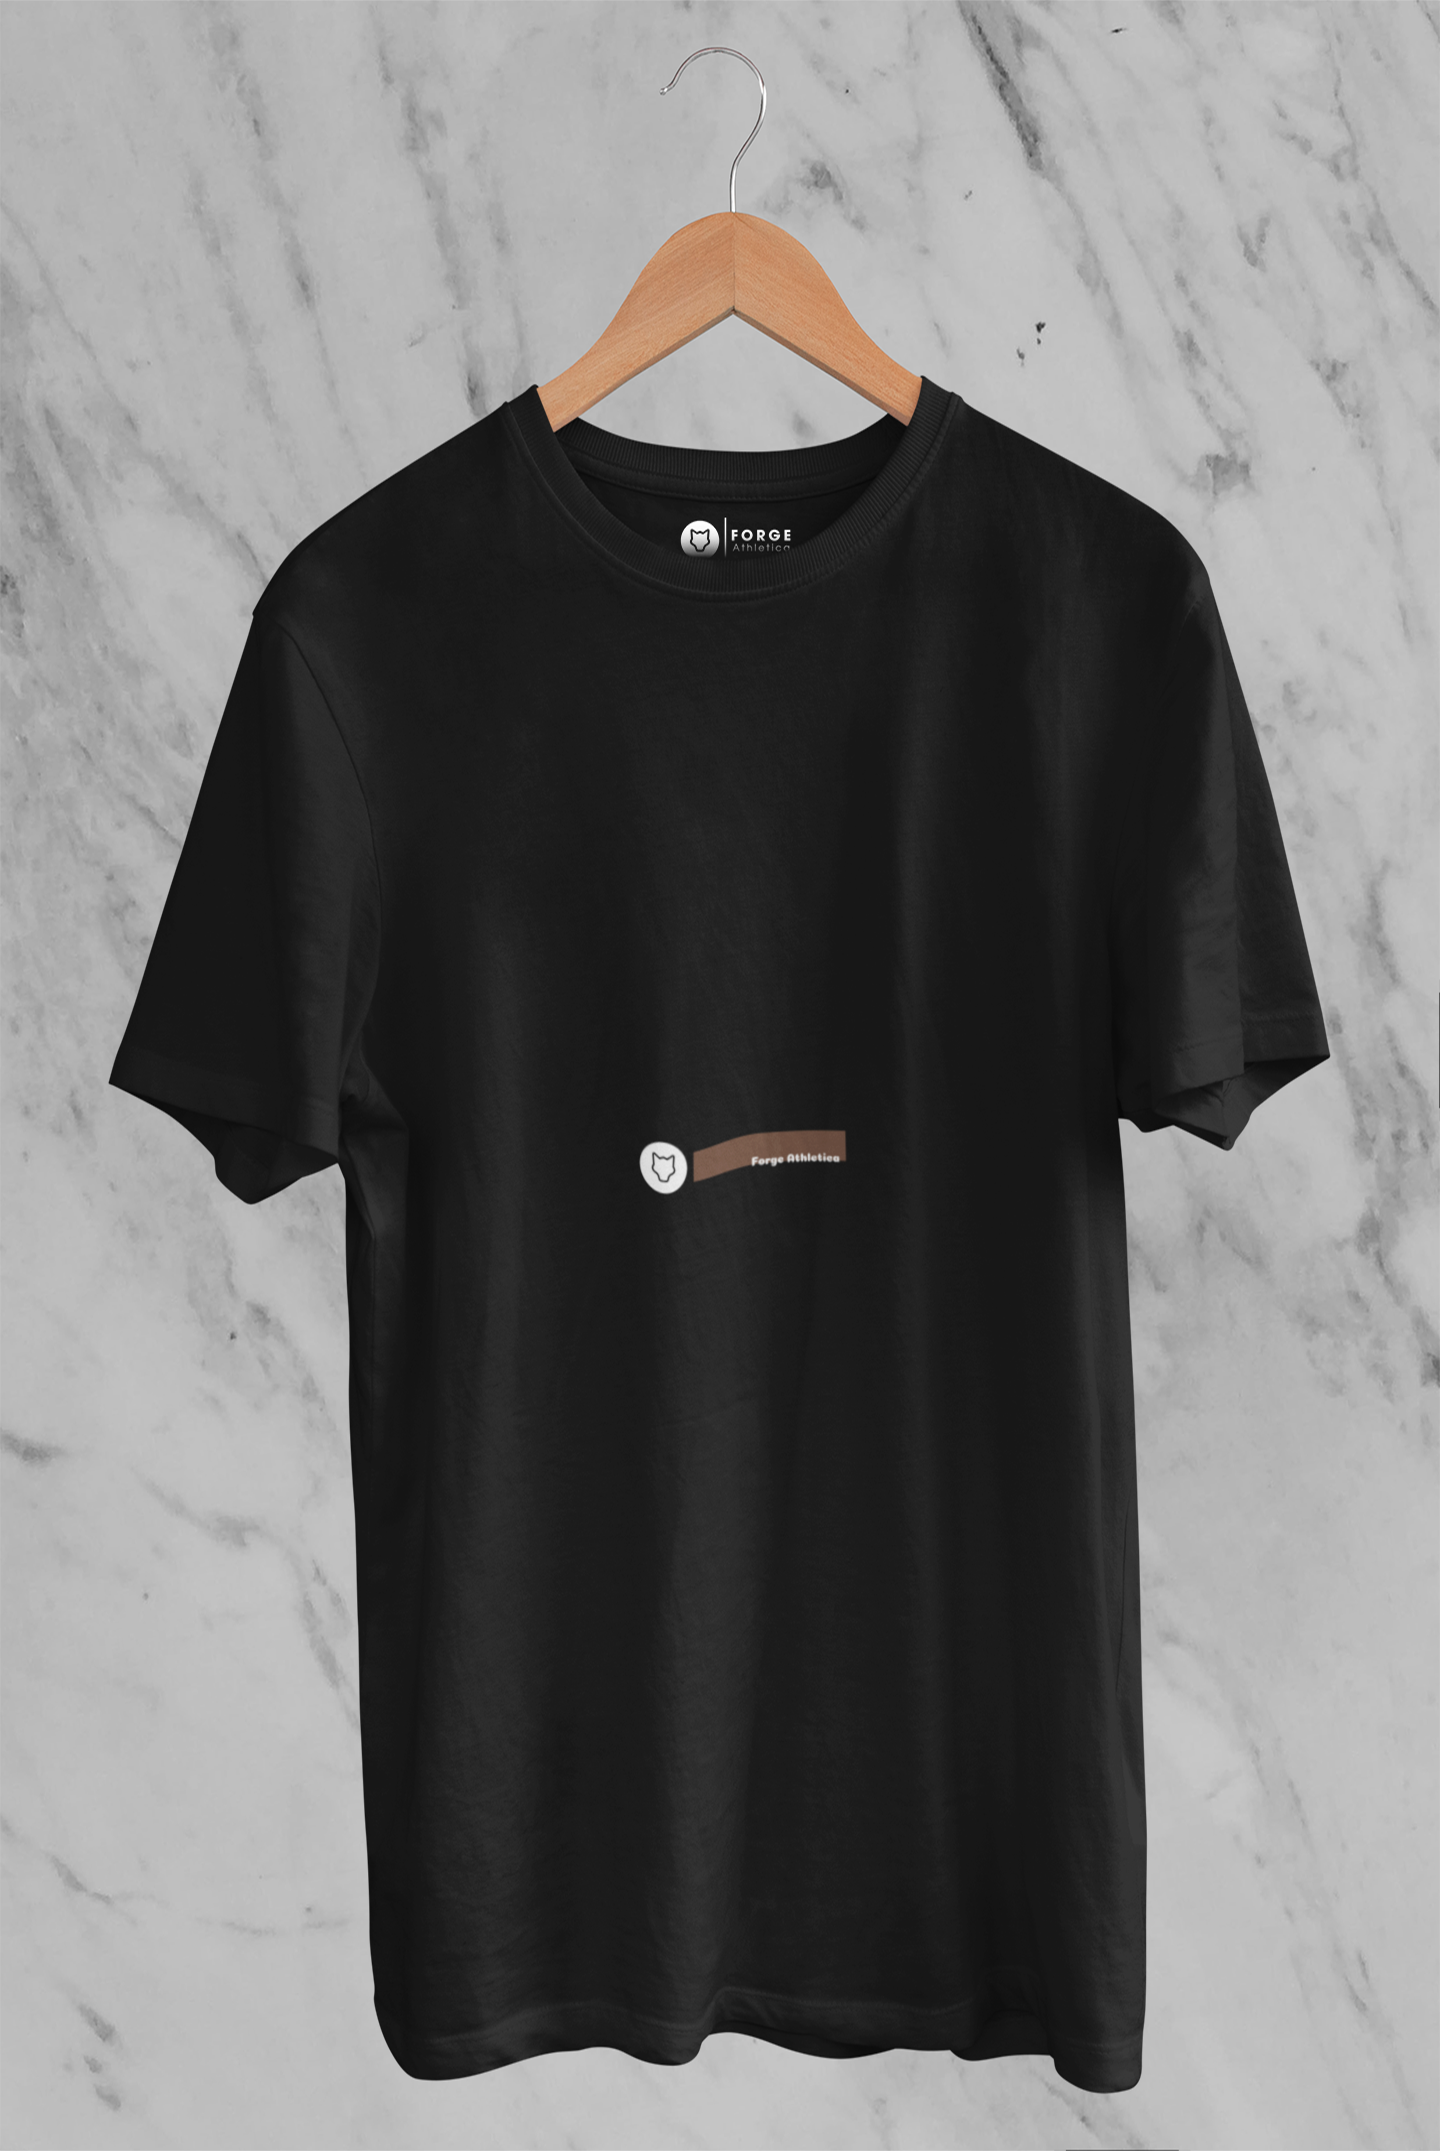 Minimalistic cotton Black Tee-Shirt hanging on a hanger with white background.